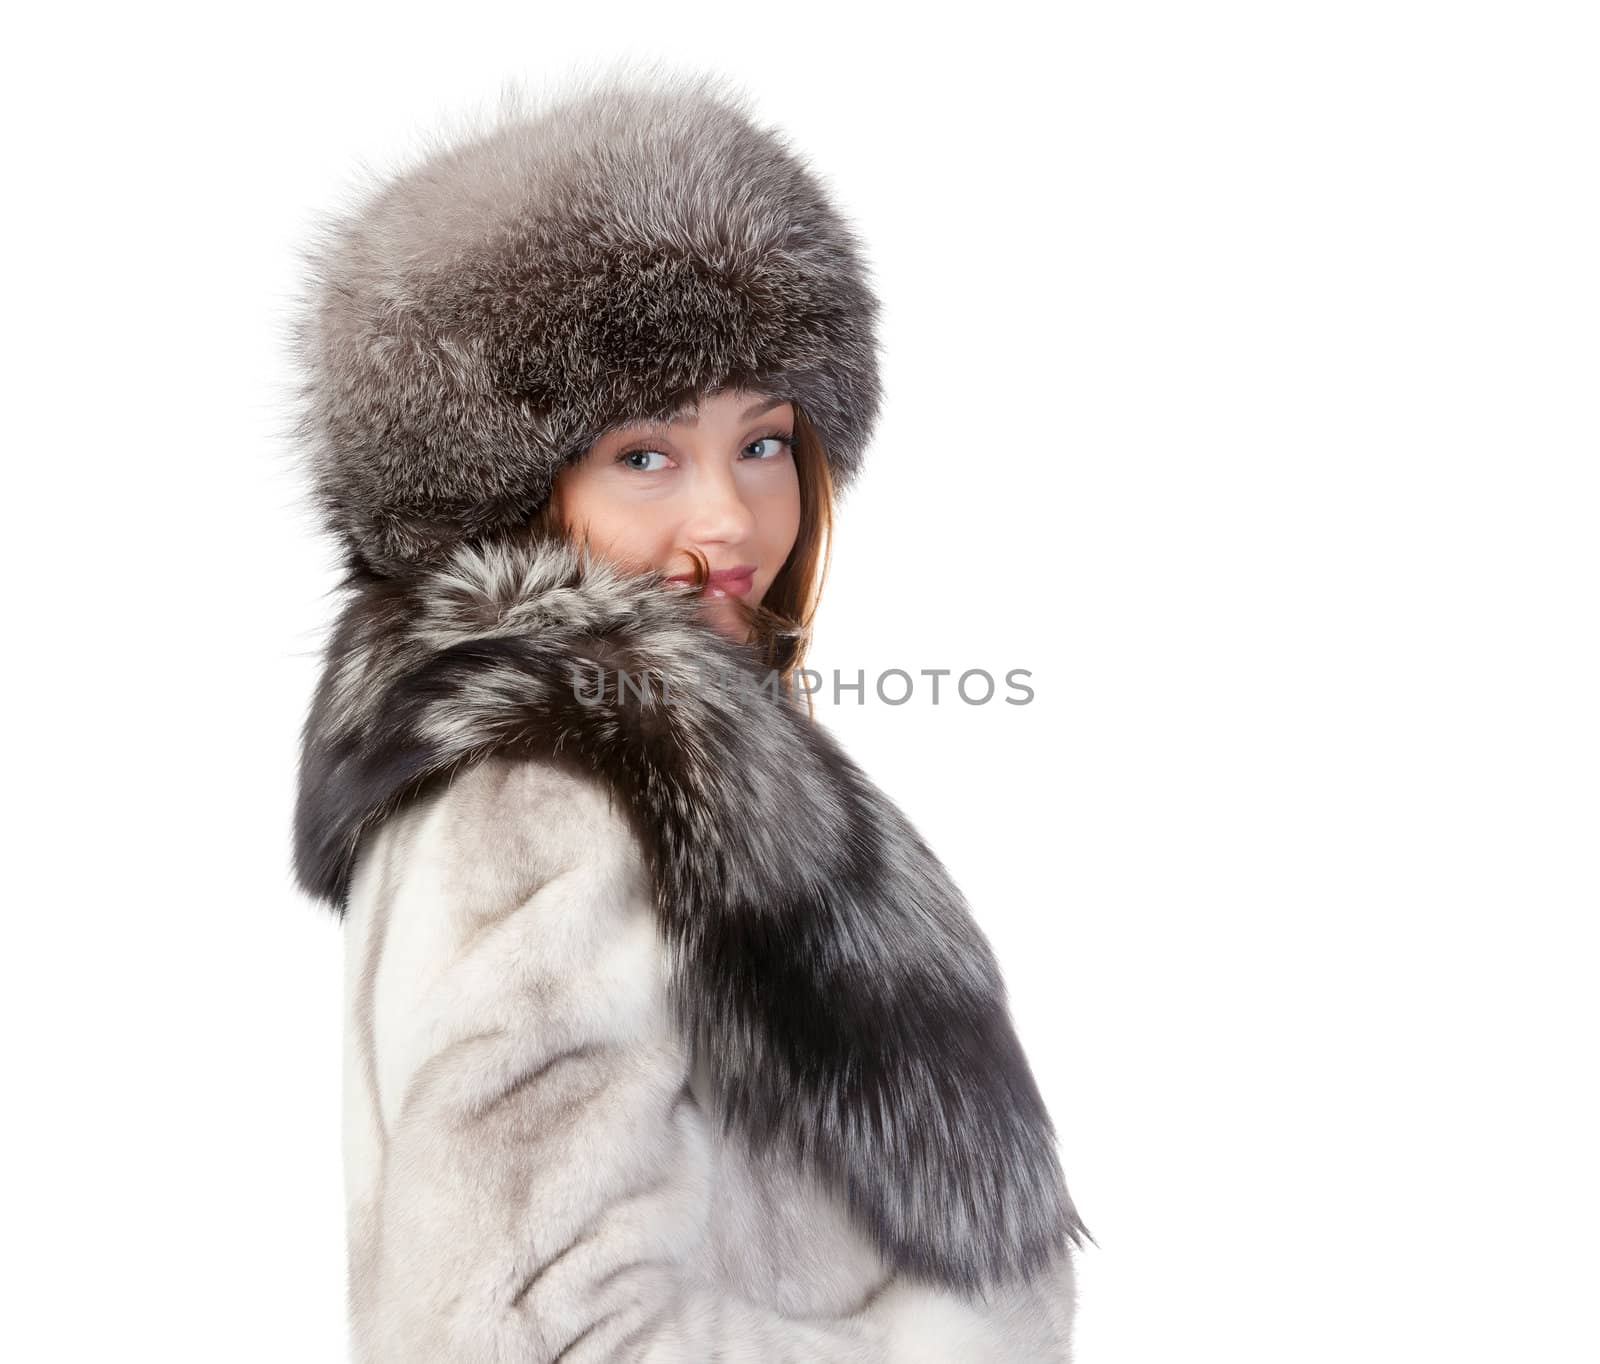 Sexy woman wearing a stylish winter fur coat and hat for protection against the bitter cold on a white background